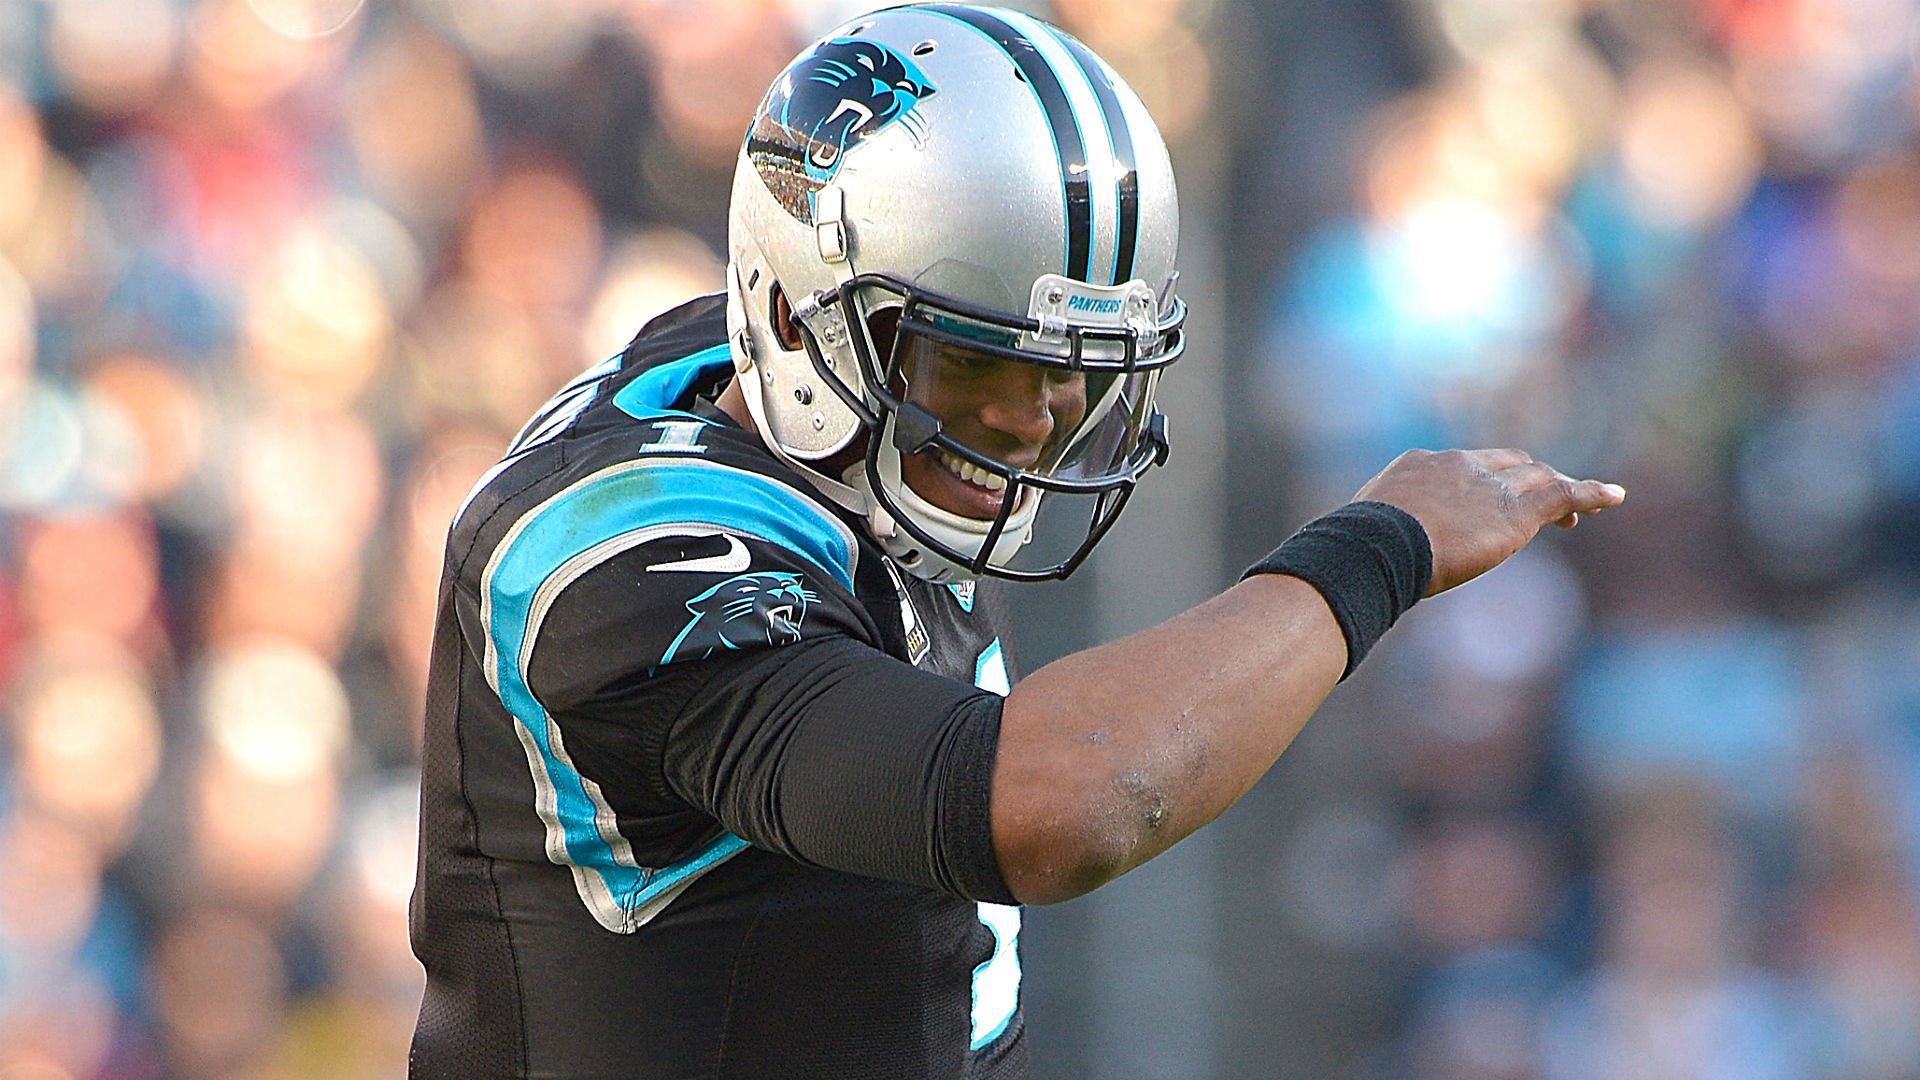 Cam Newton's biggest plays of the year